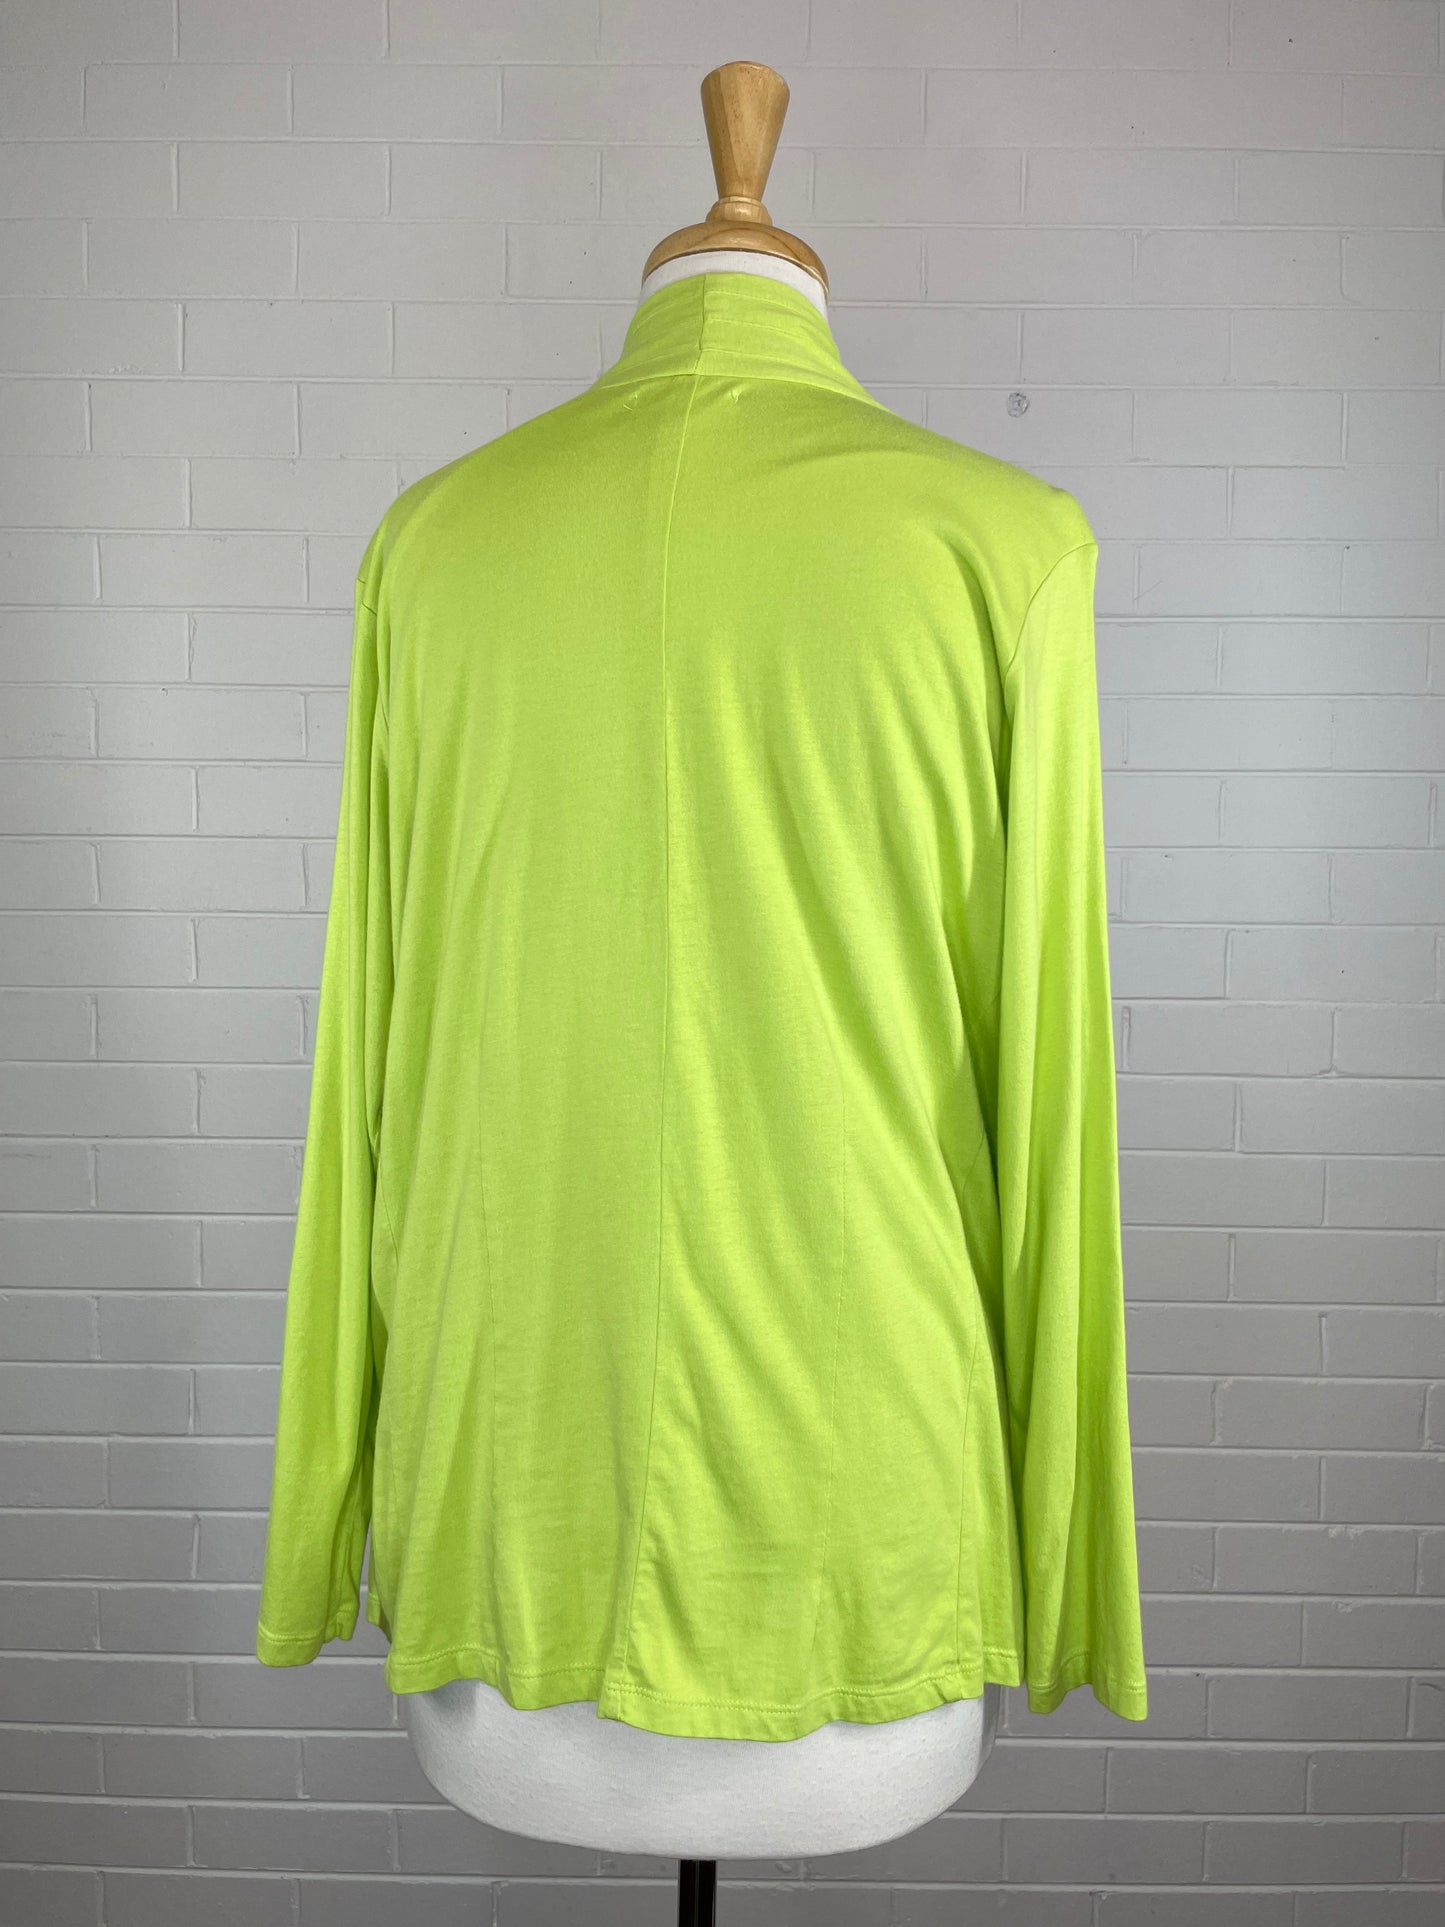 Victoria Hill | top | size 18 | long sleeve | cotton modal blend